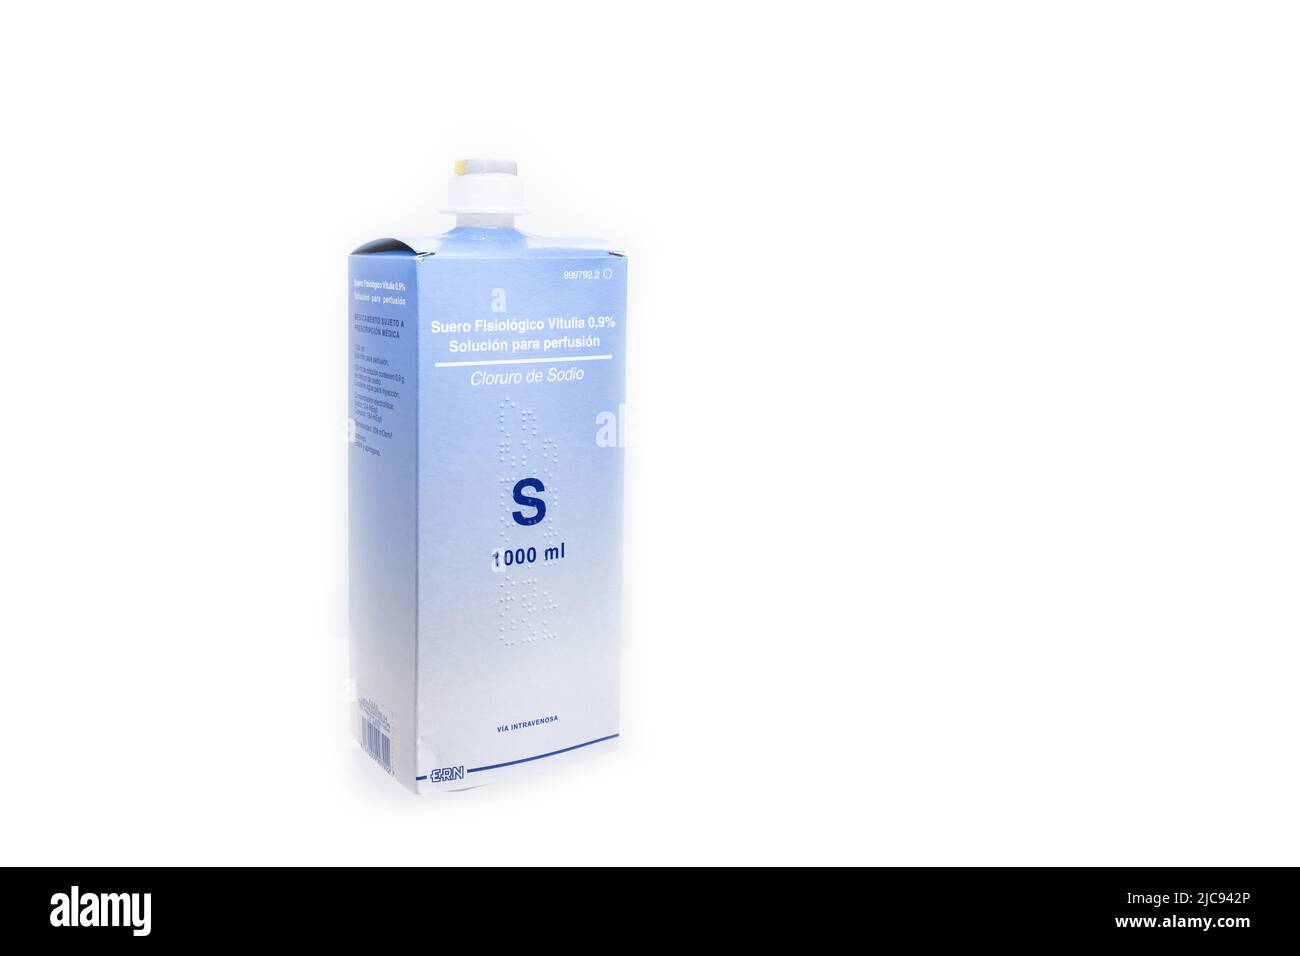 Huelva, Spain - June 10, 2022: A box containing a plastic bottle of spanish Saline solution brand Vitulia from ERN laboratory for intravenously. It is Stock Photo